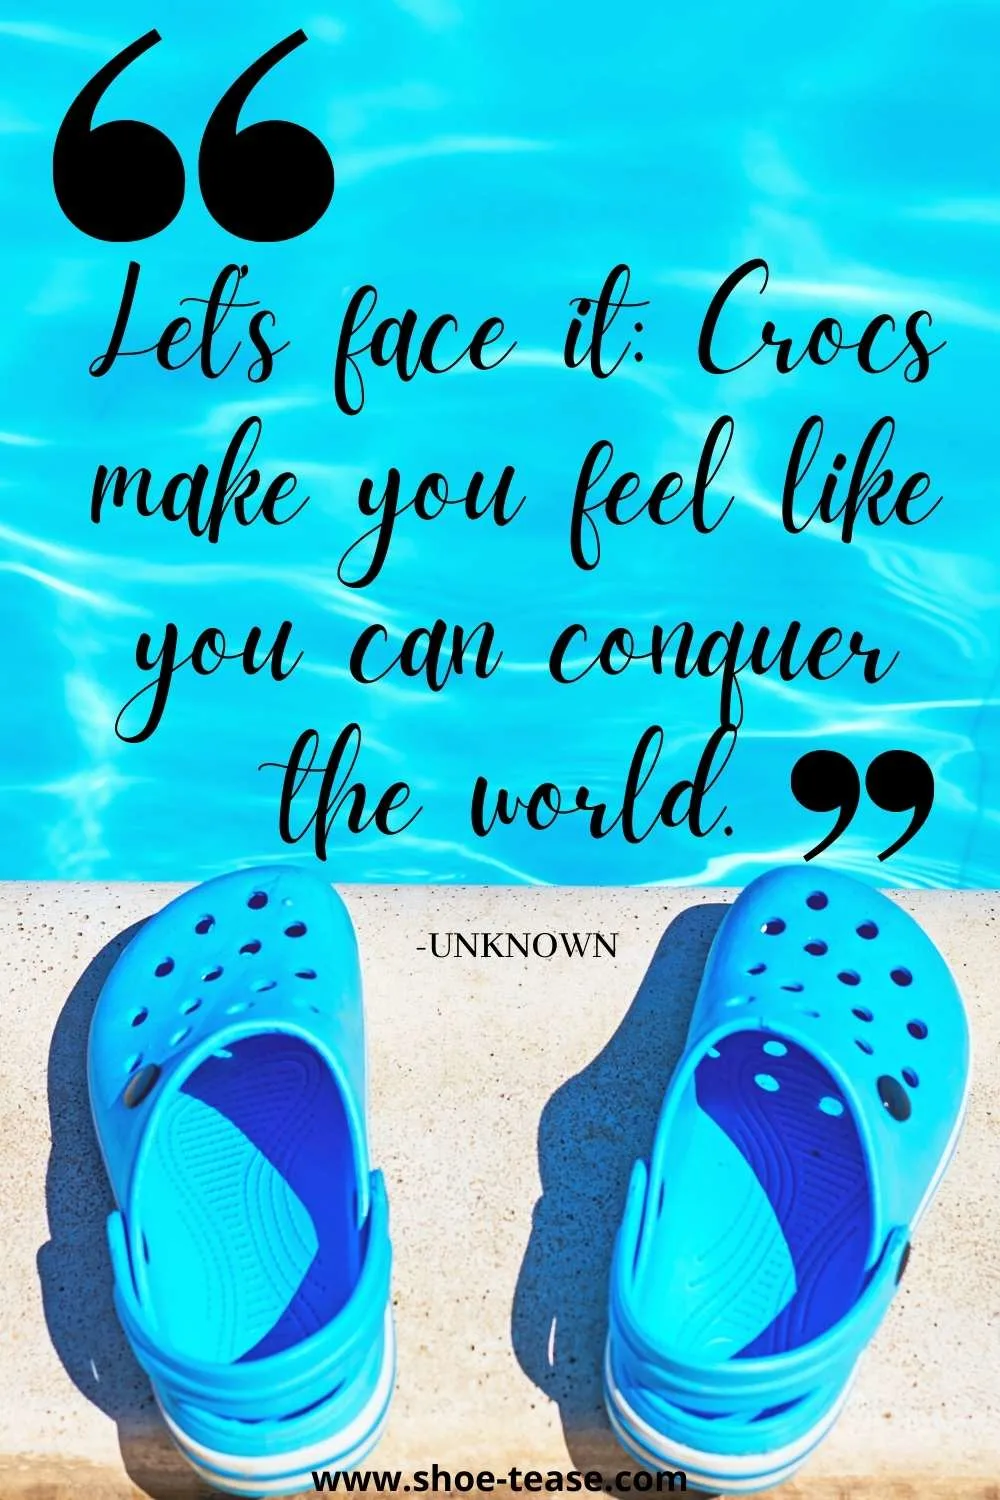 Crocs Quotes reading Let's face it Crocs make you feel like you can conquer the world.